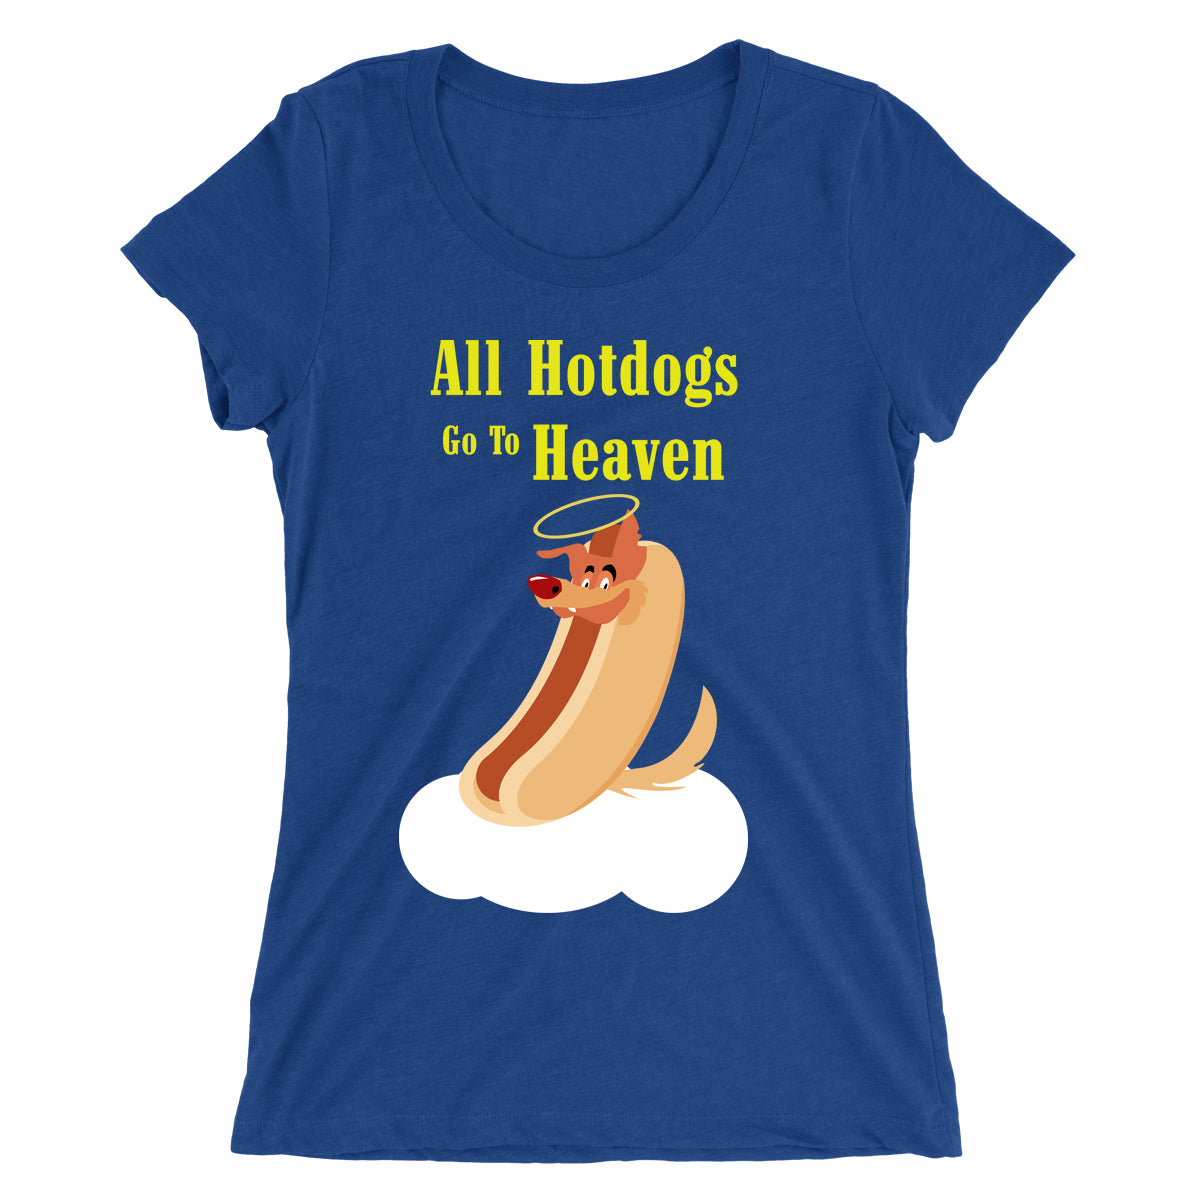 Movie The Food - All Hotdogs Go To Heaven Women's T-Shirt - Royal Blue